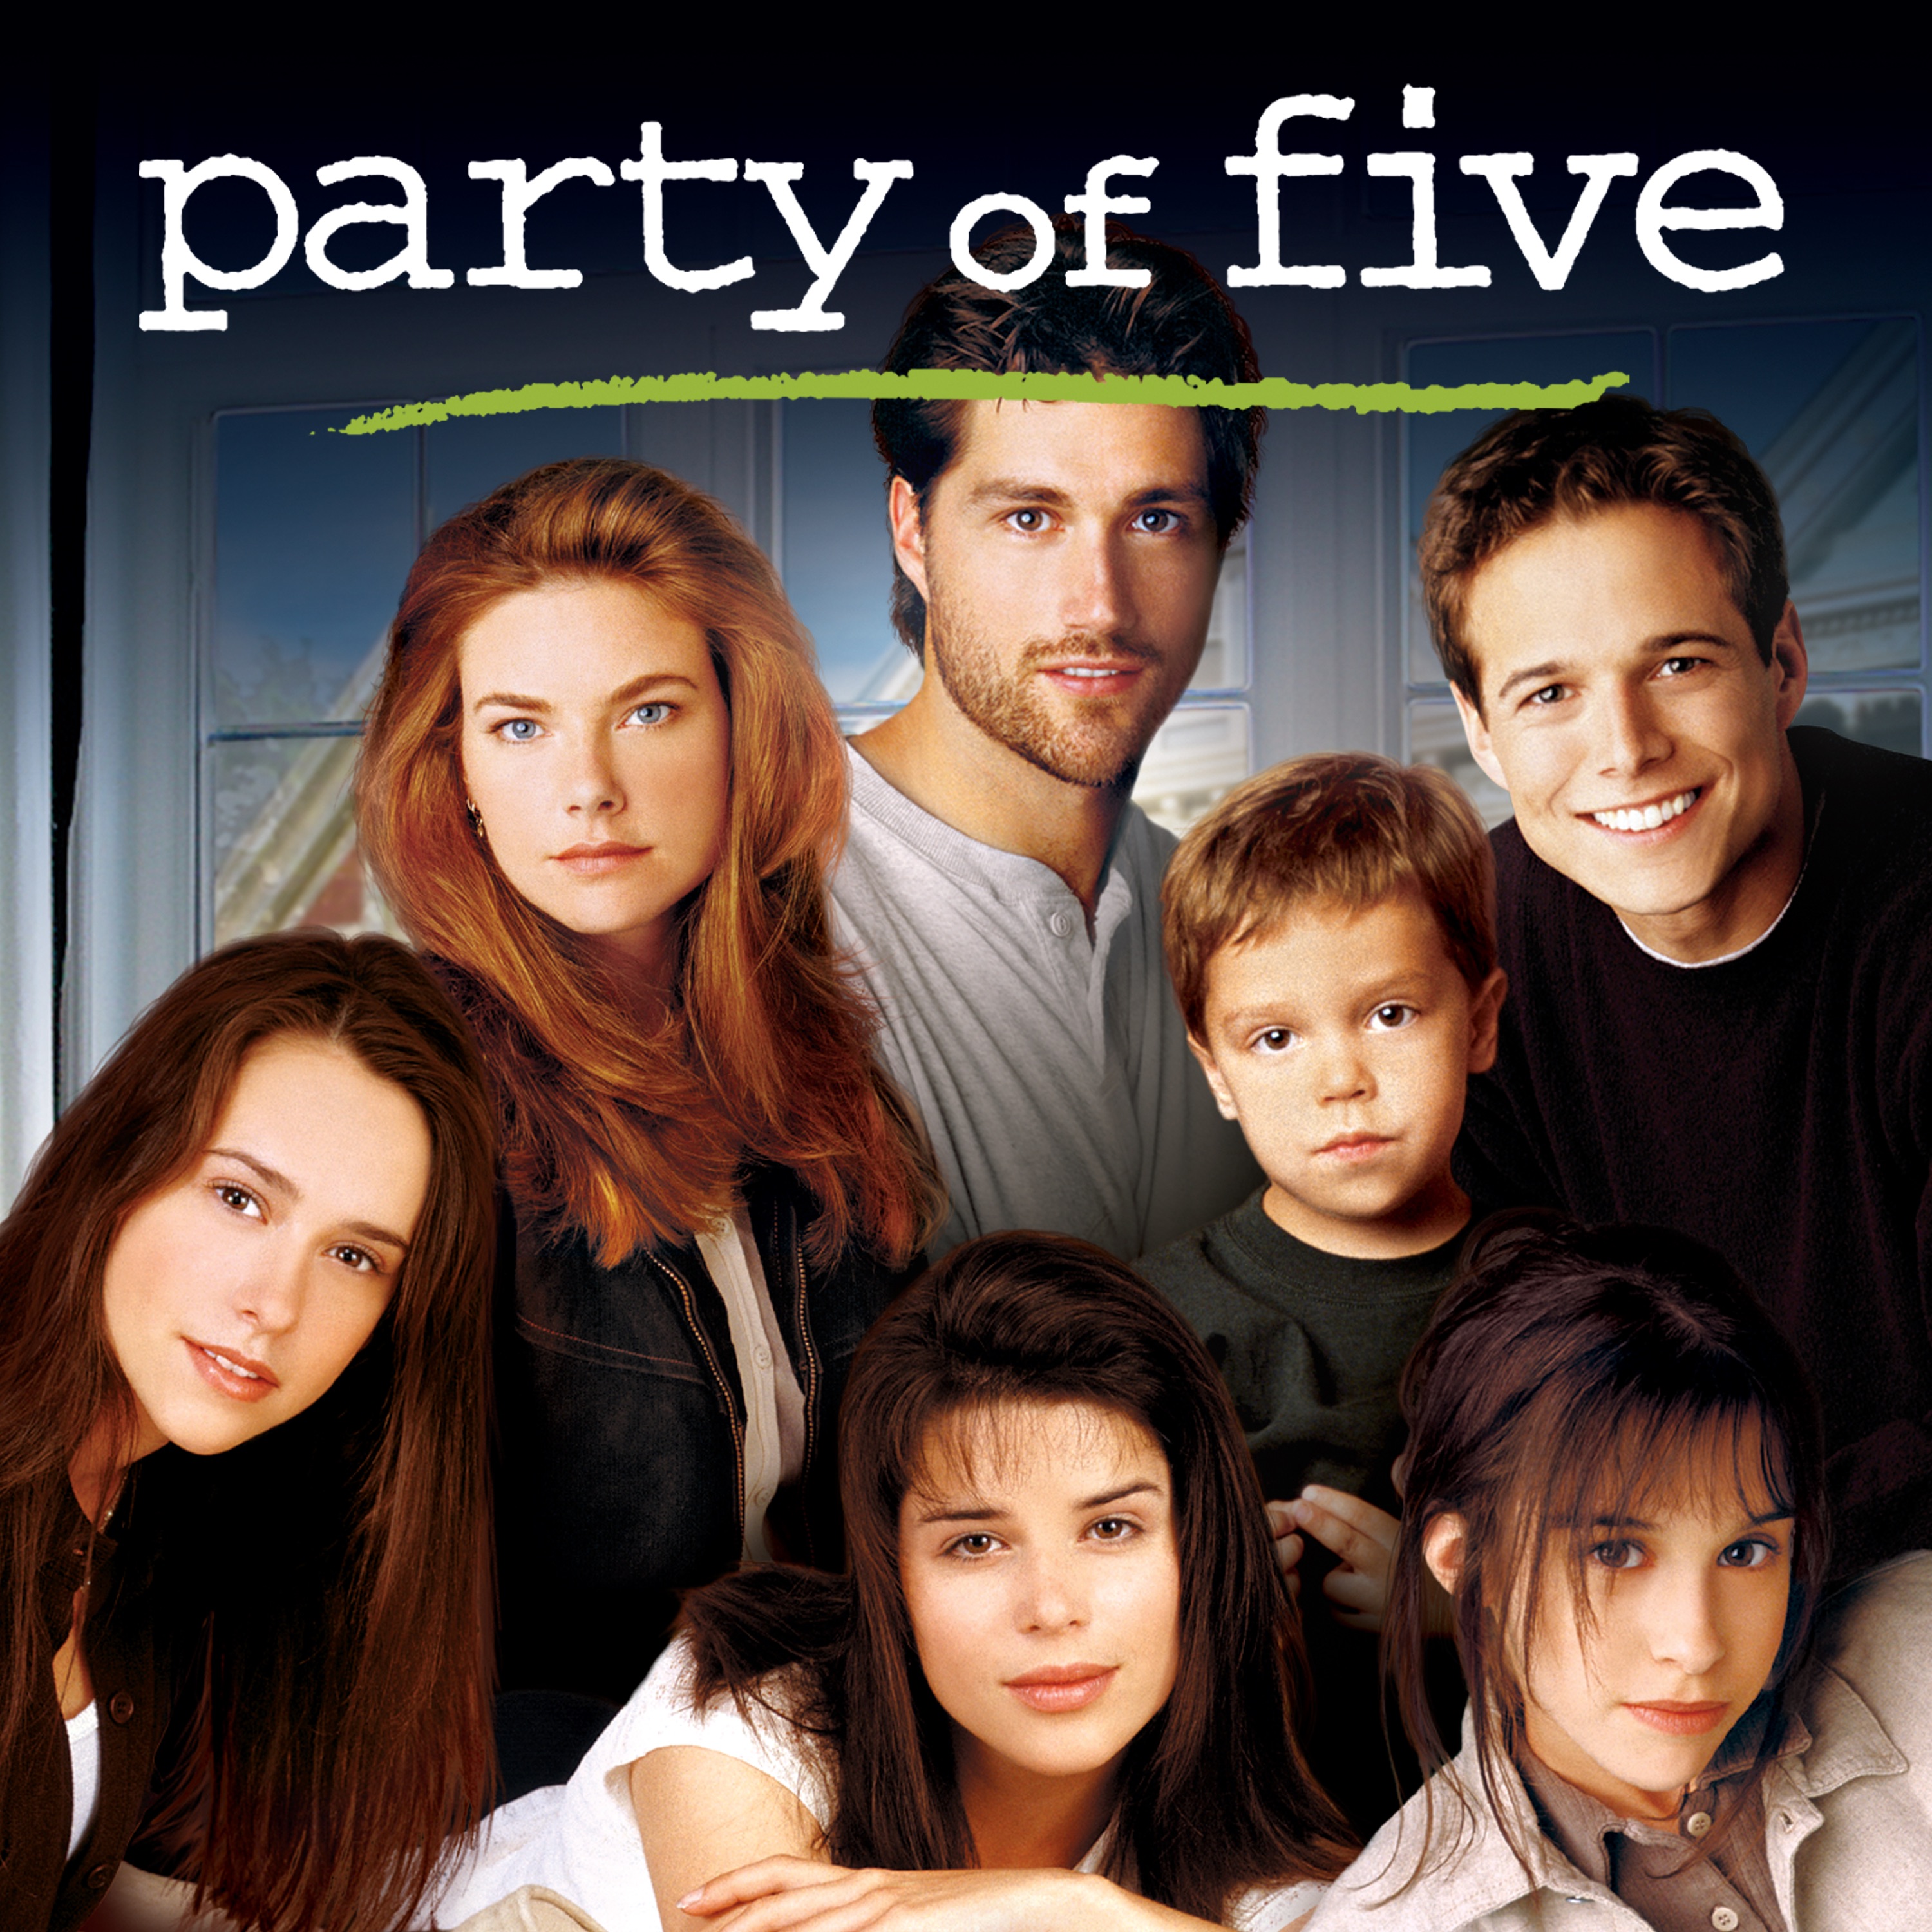 Party of Five - Season 3 Opening - YouTube